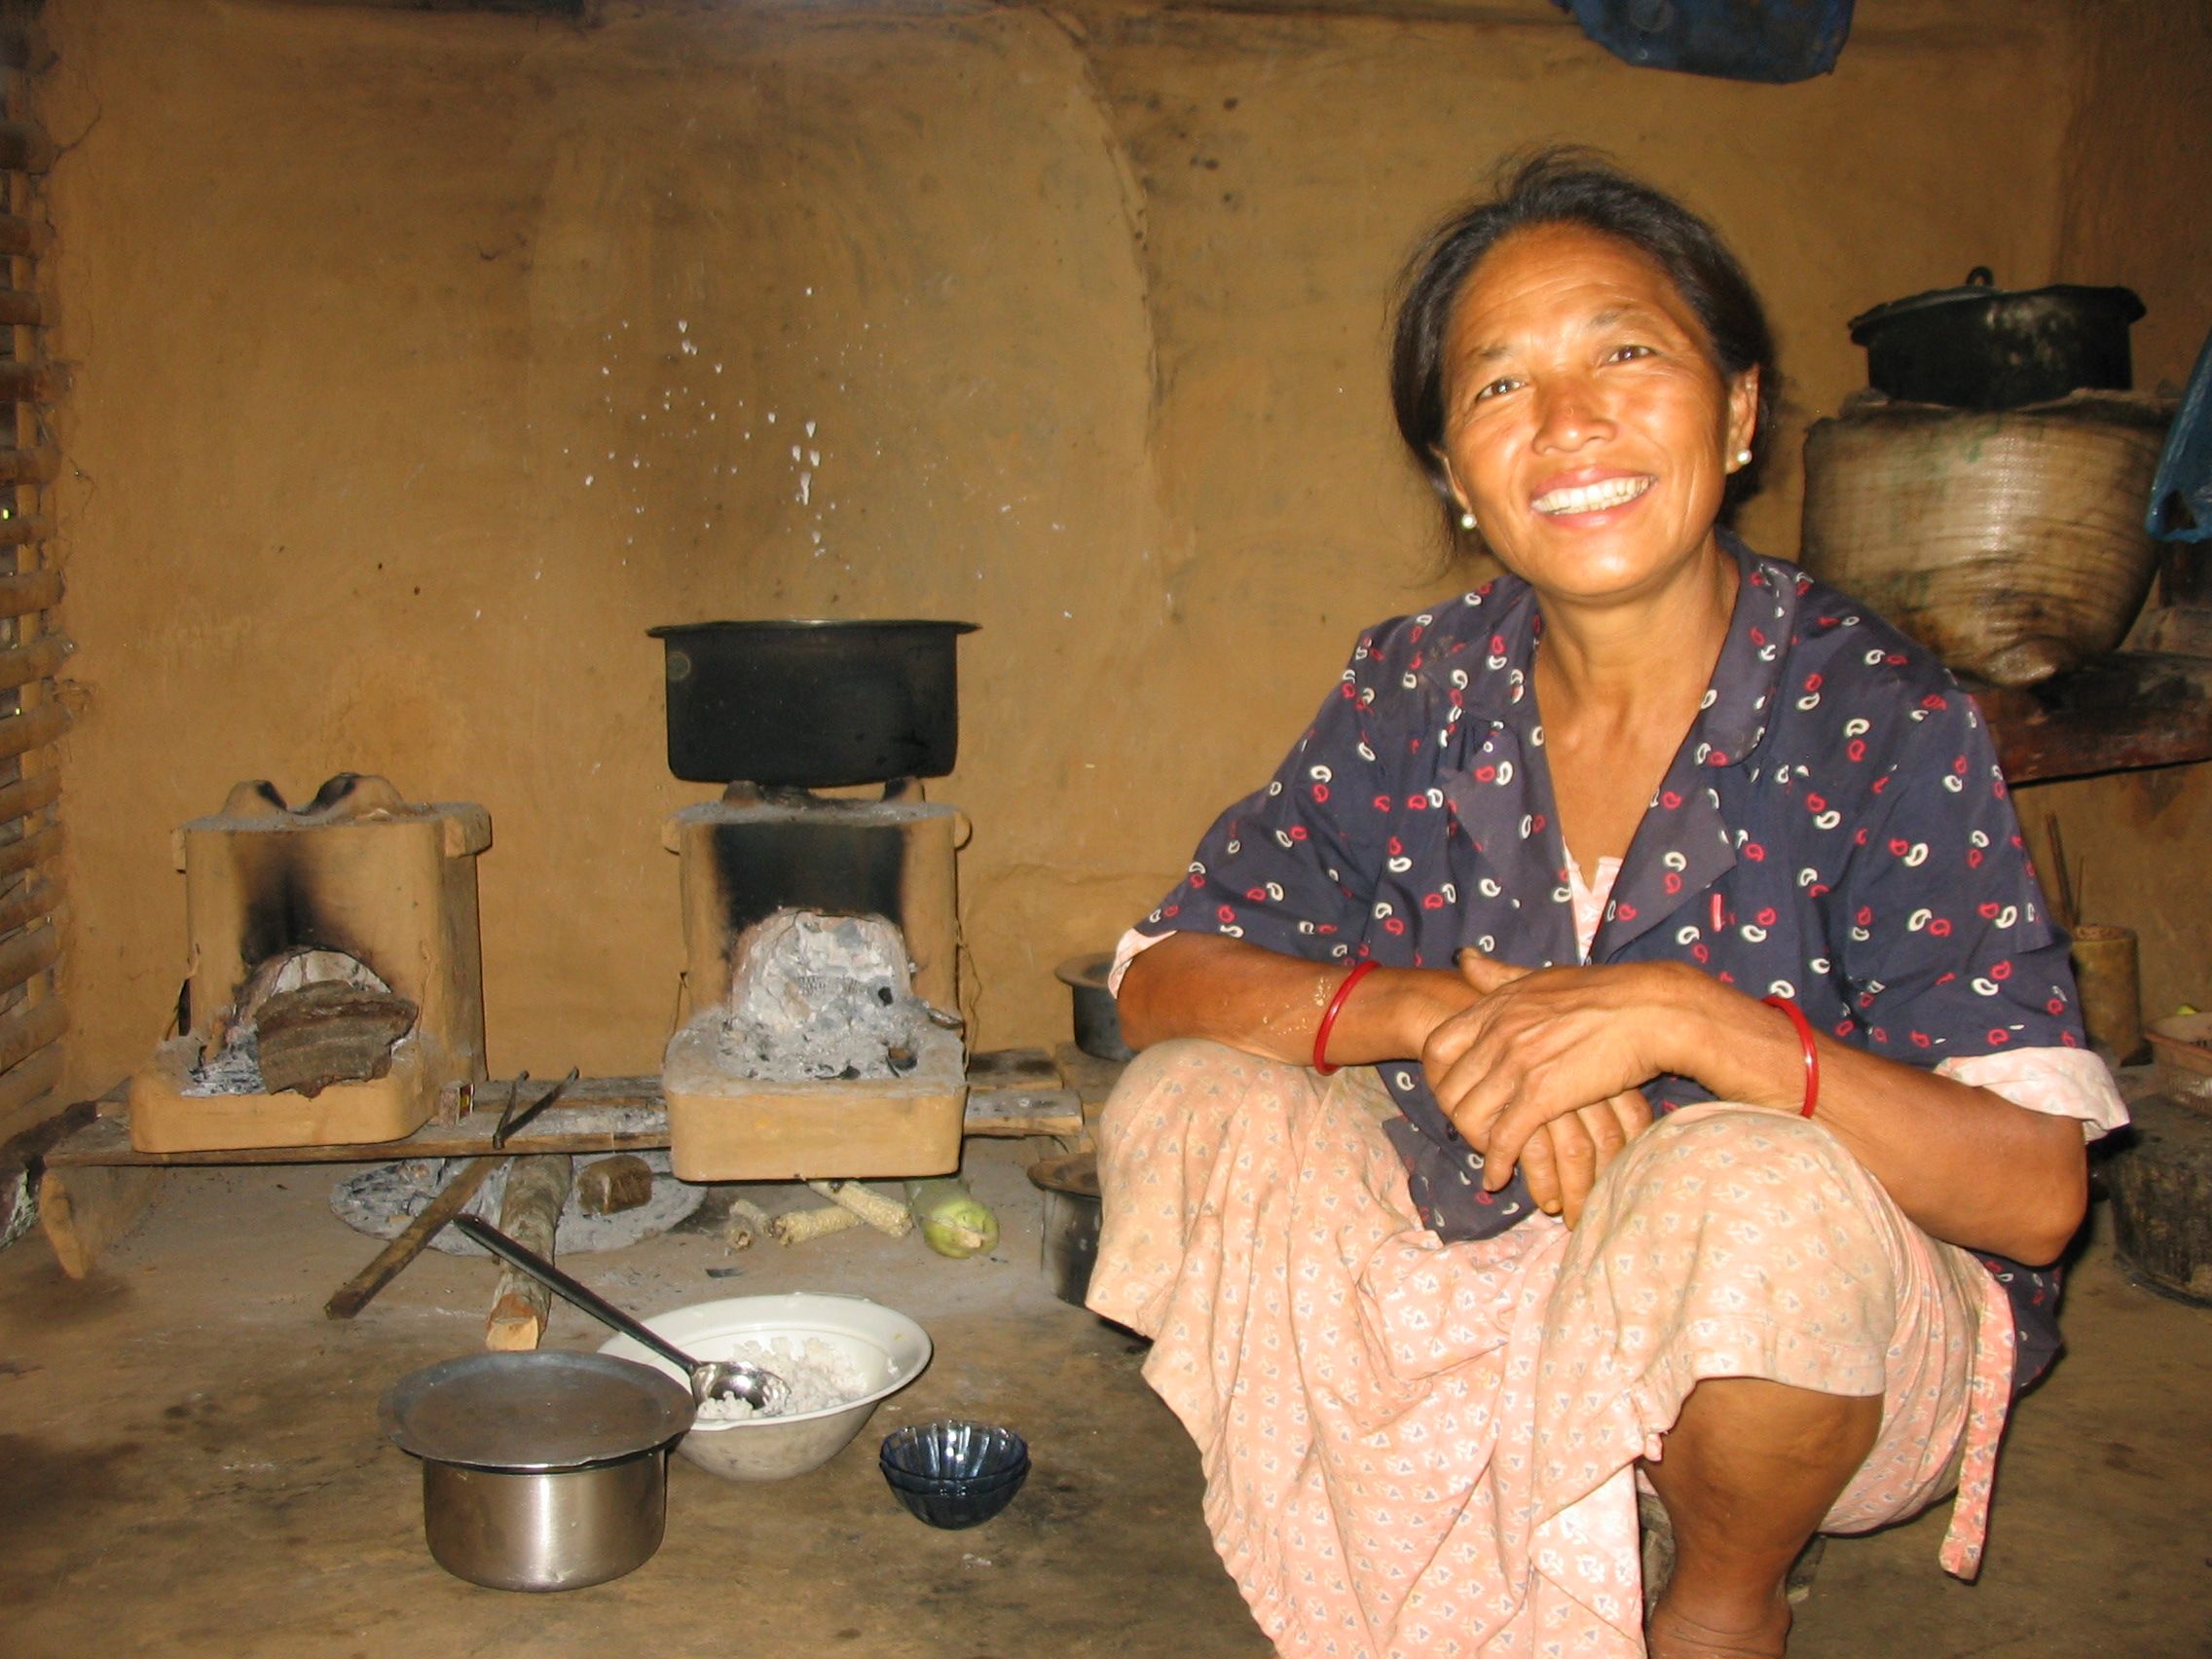 Learn how to cook traditional food on your Gap Year with friends